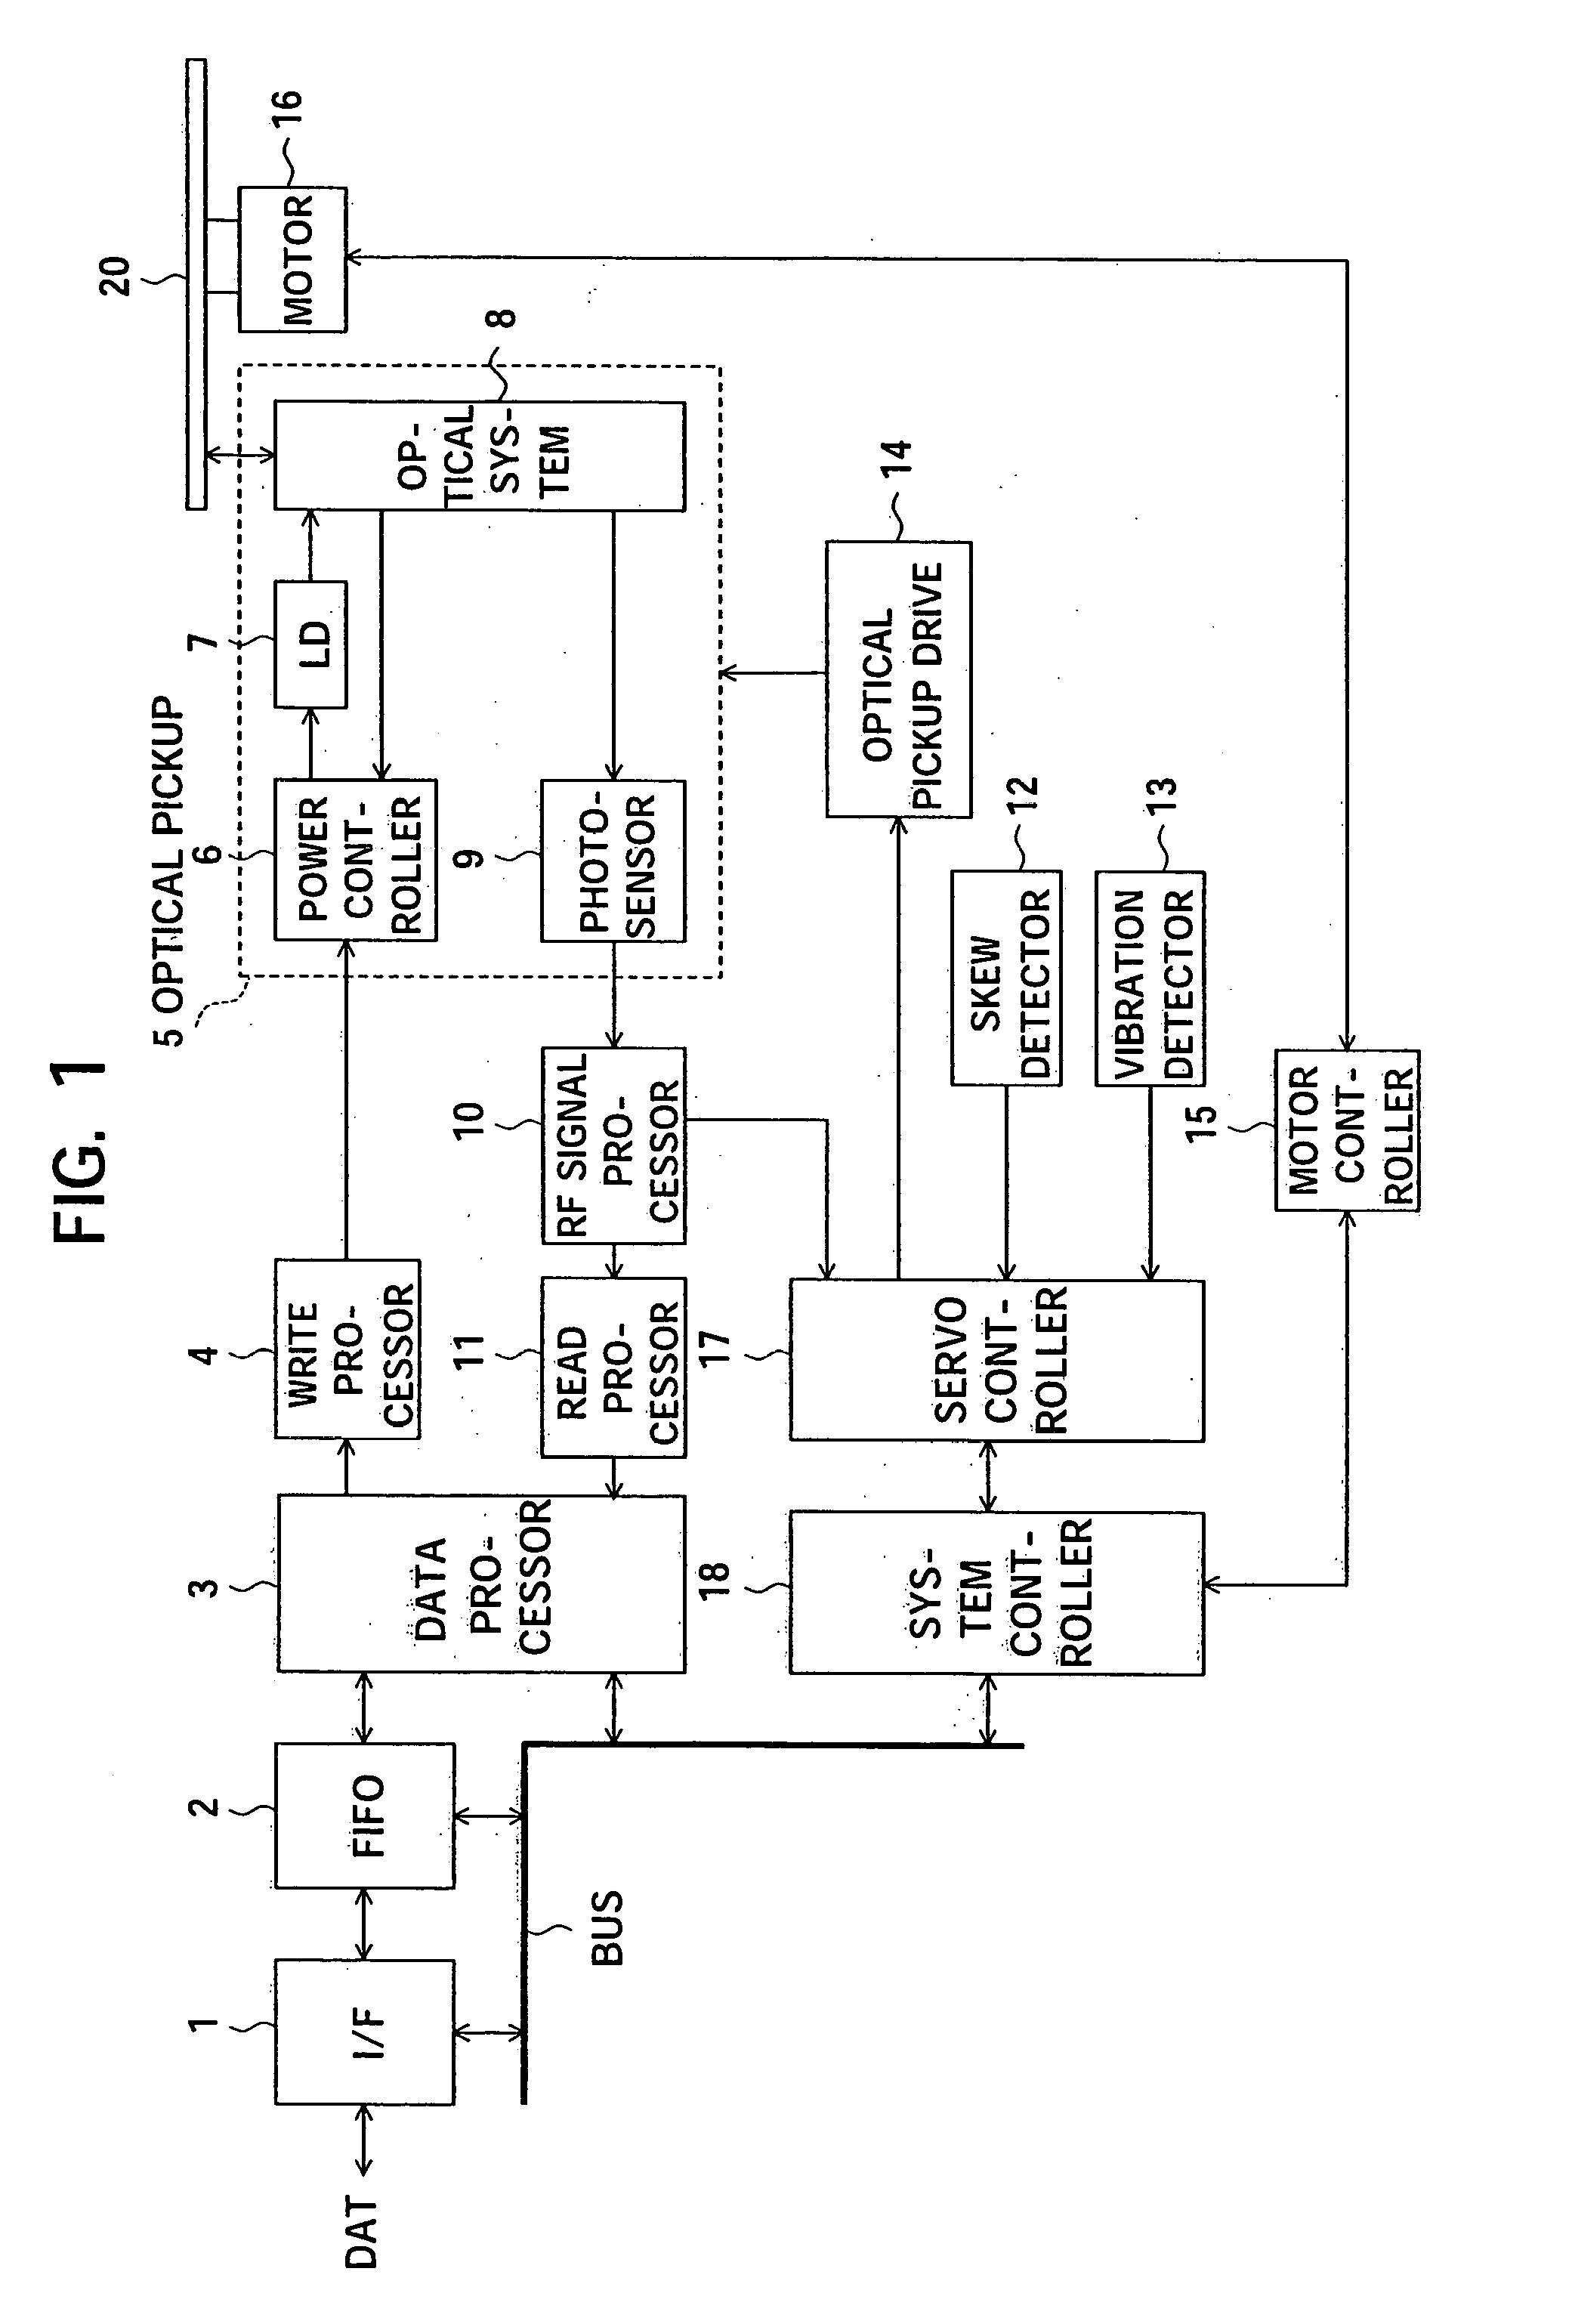 Optical disk device and method of control of an optical disk